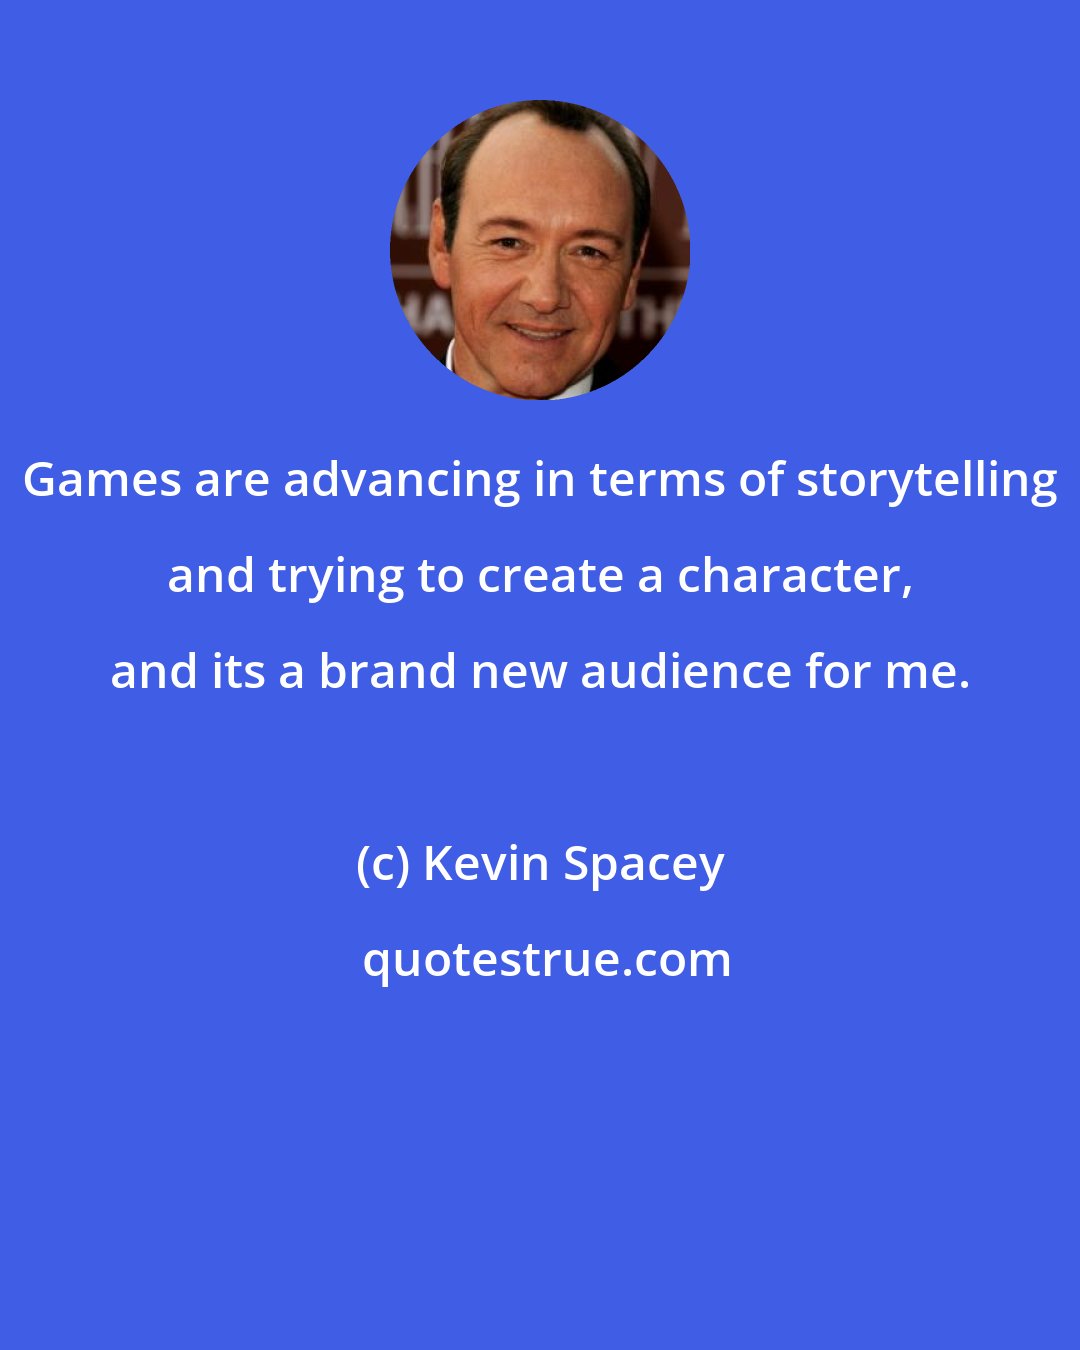 Kevin Spacey: Games are advancing in terms of storytelling and trying to create a character, and its a brand new audience for me.